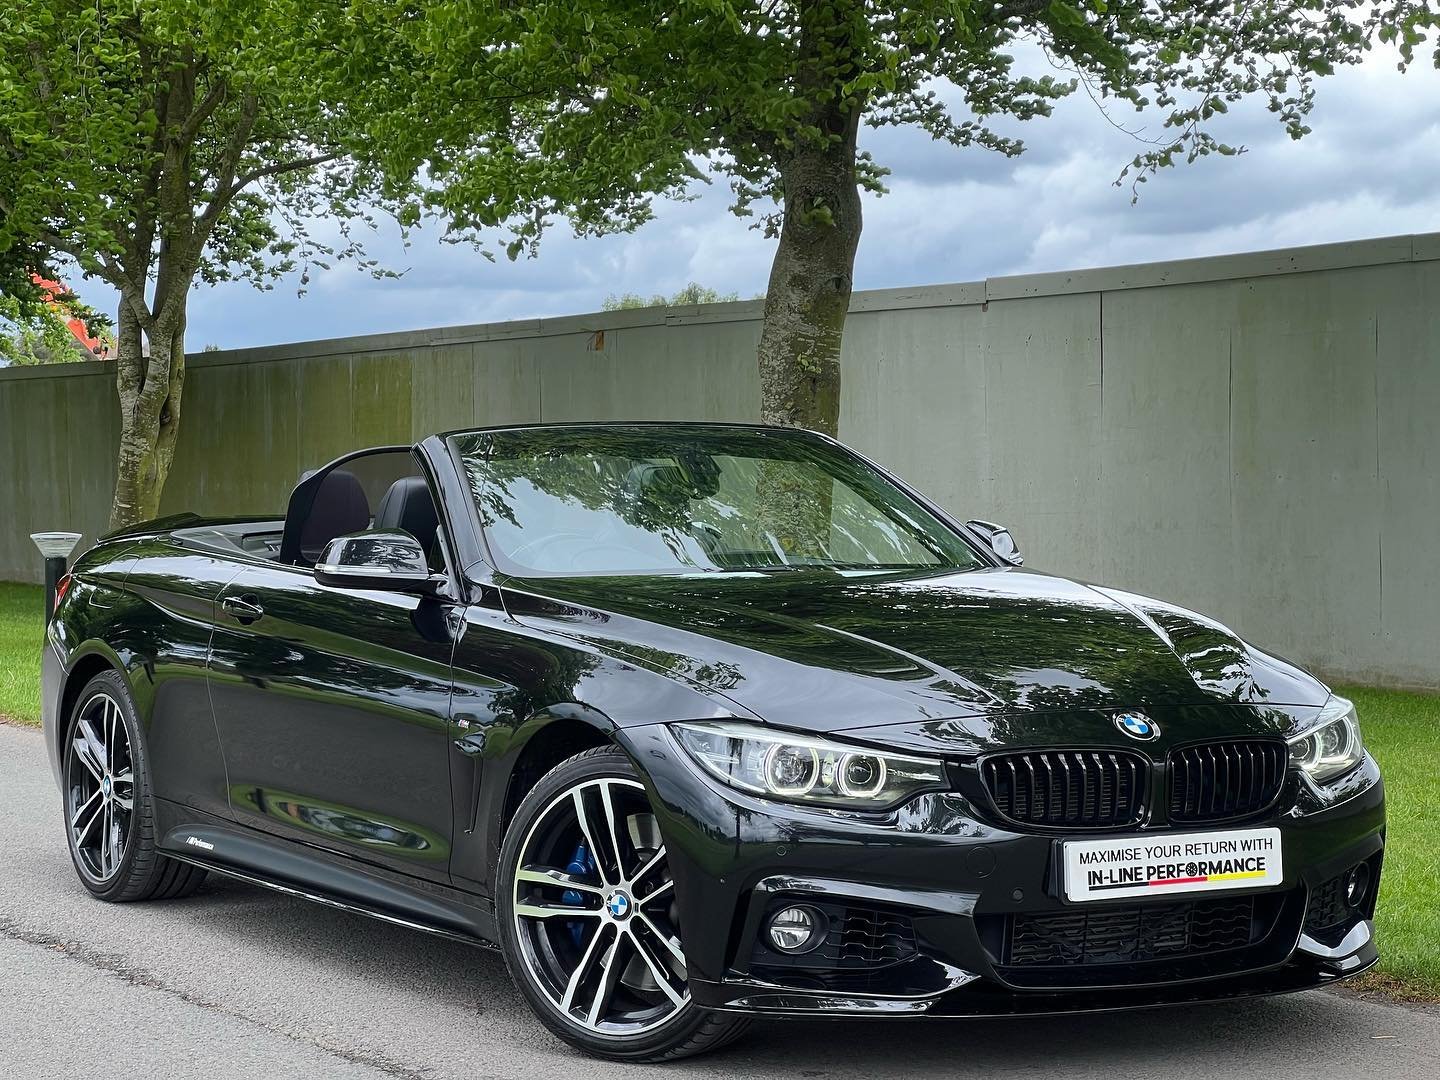 Here At IN-LINE PERFORMANCE We Take Pride And Joy Into Supplying You With Great Examples  Off German Engineering. We Are Proud To Present To You This 2019 BMW 435D Convertible Finished In A Desirable Black Sapphire  With Black Dokota Leather Interior